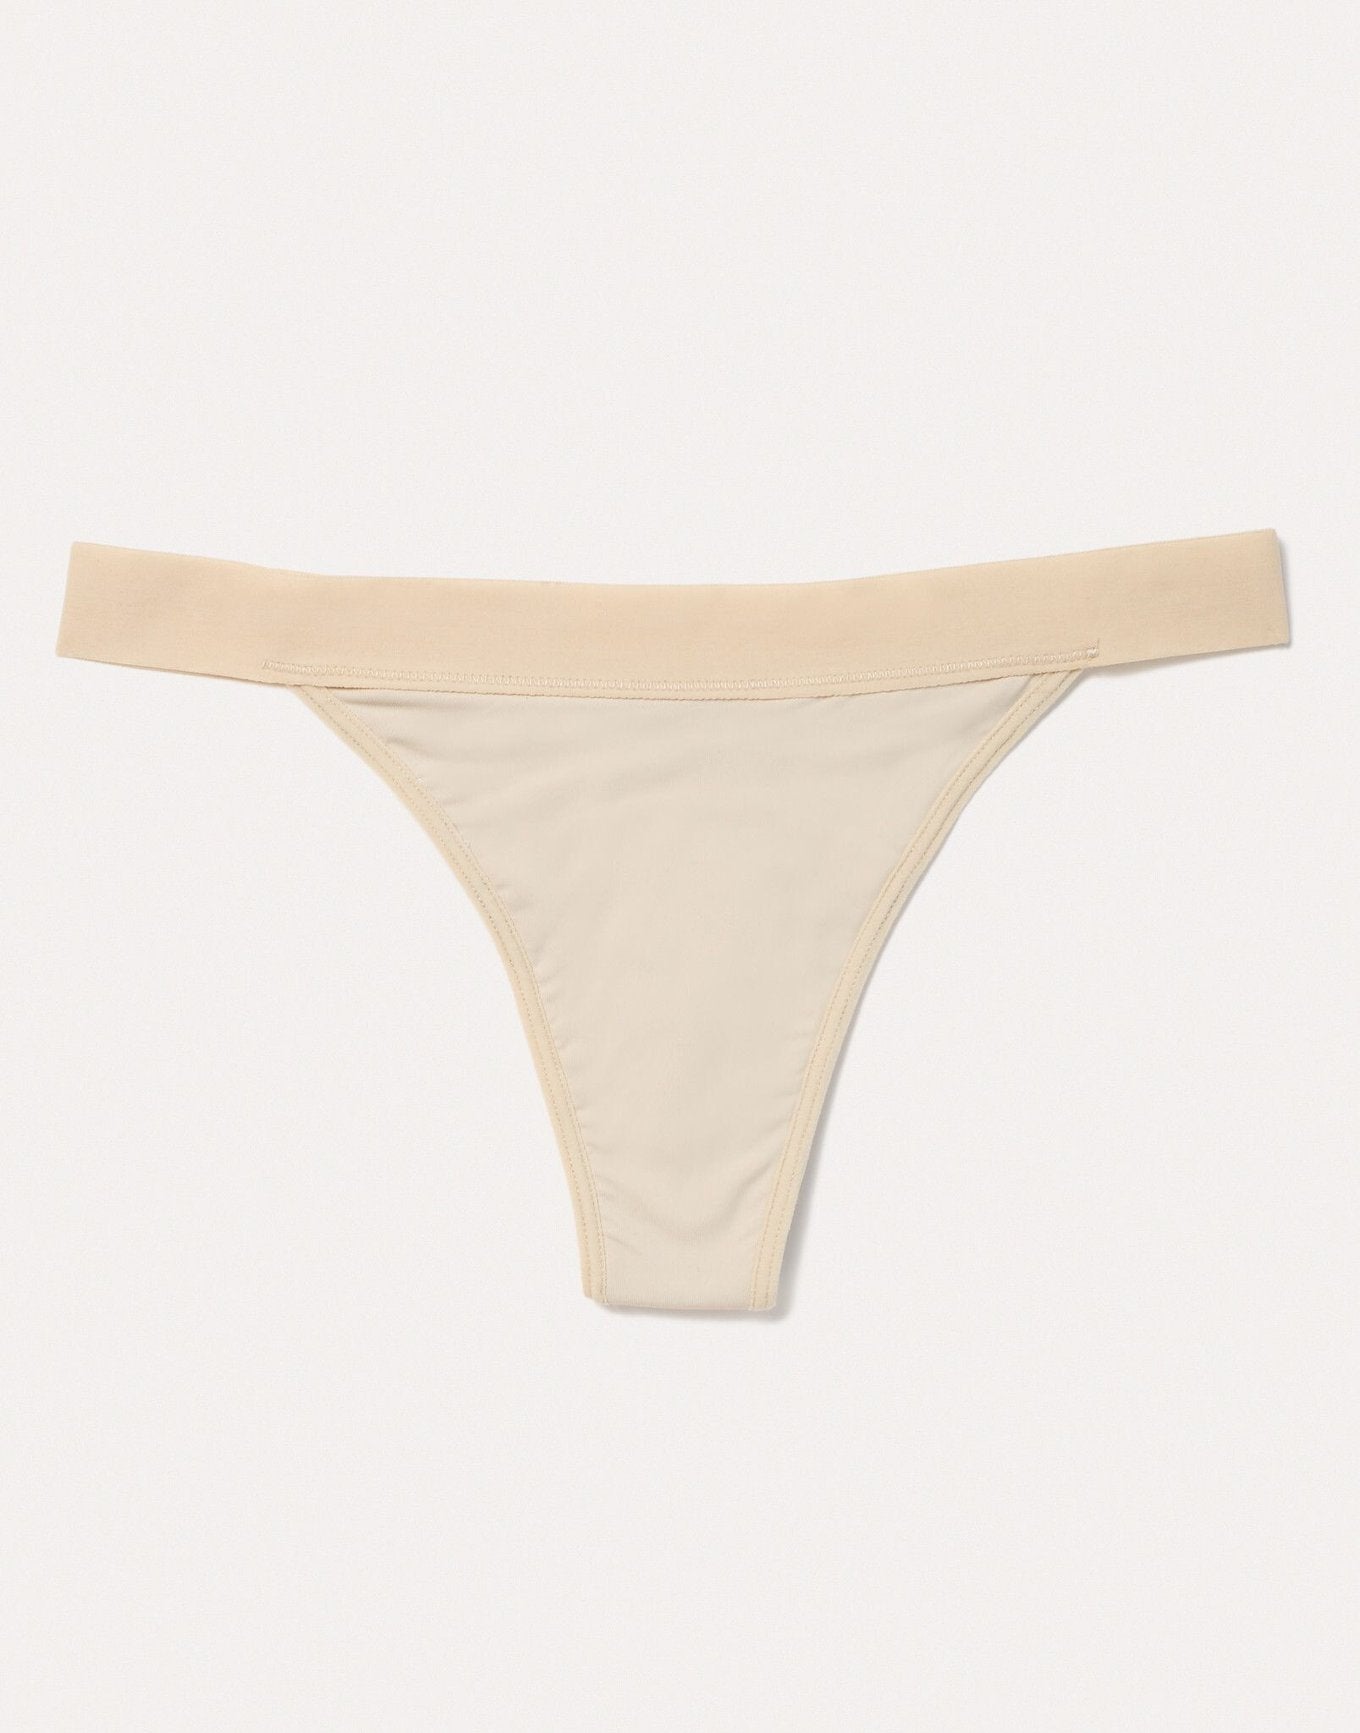 Joyja Leah period-proof panty in color Strut The Street and shape thong